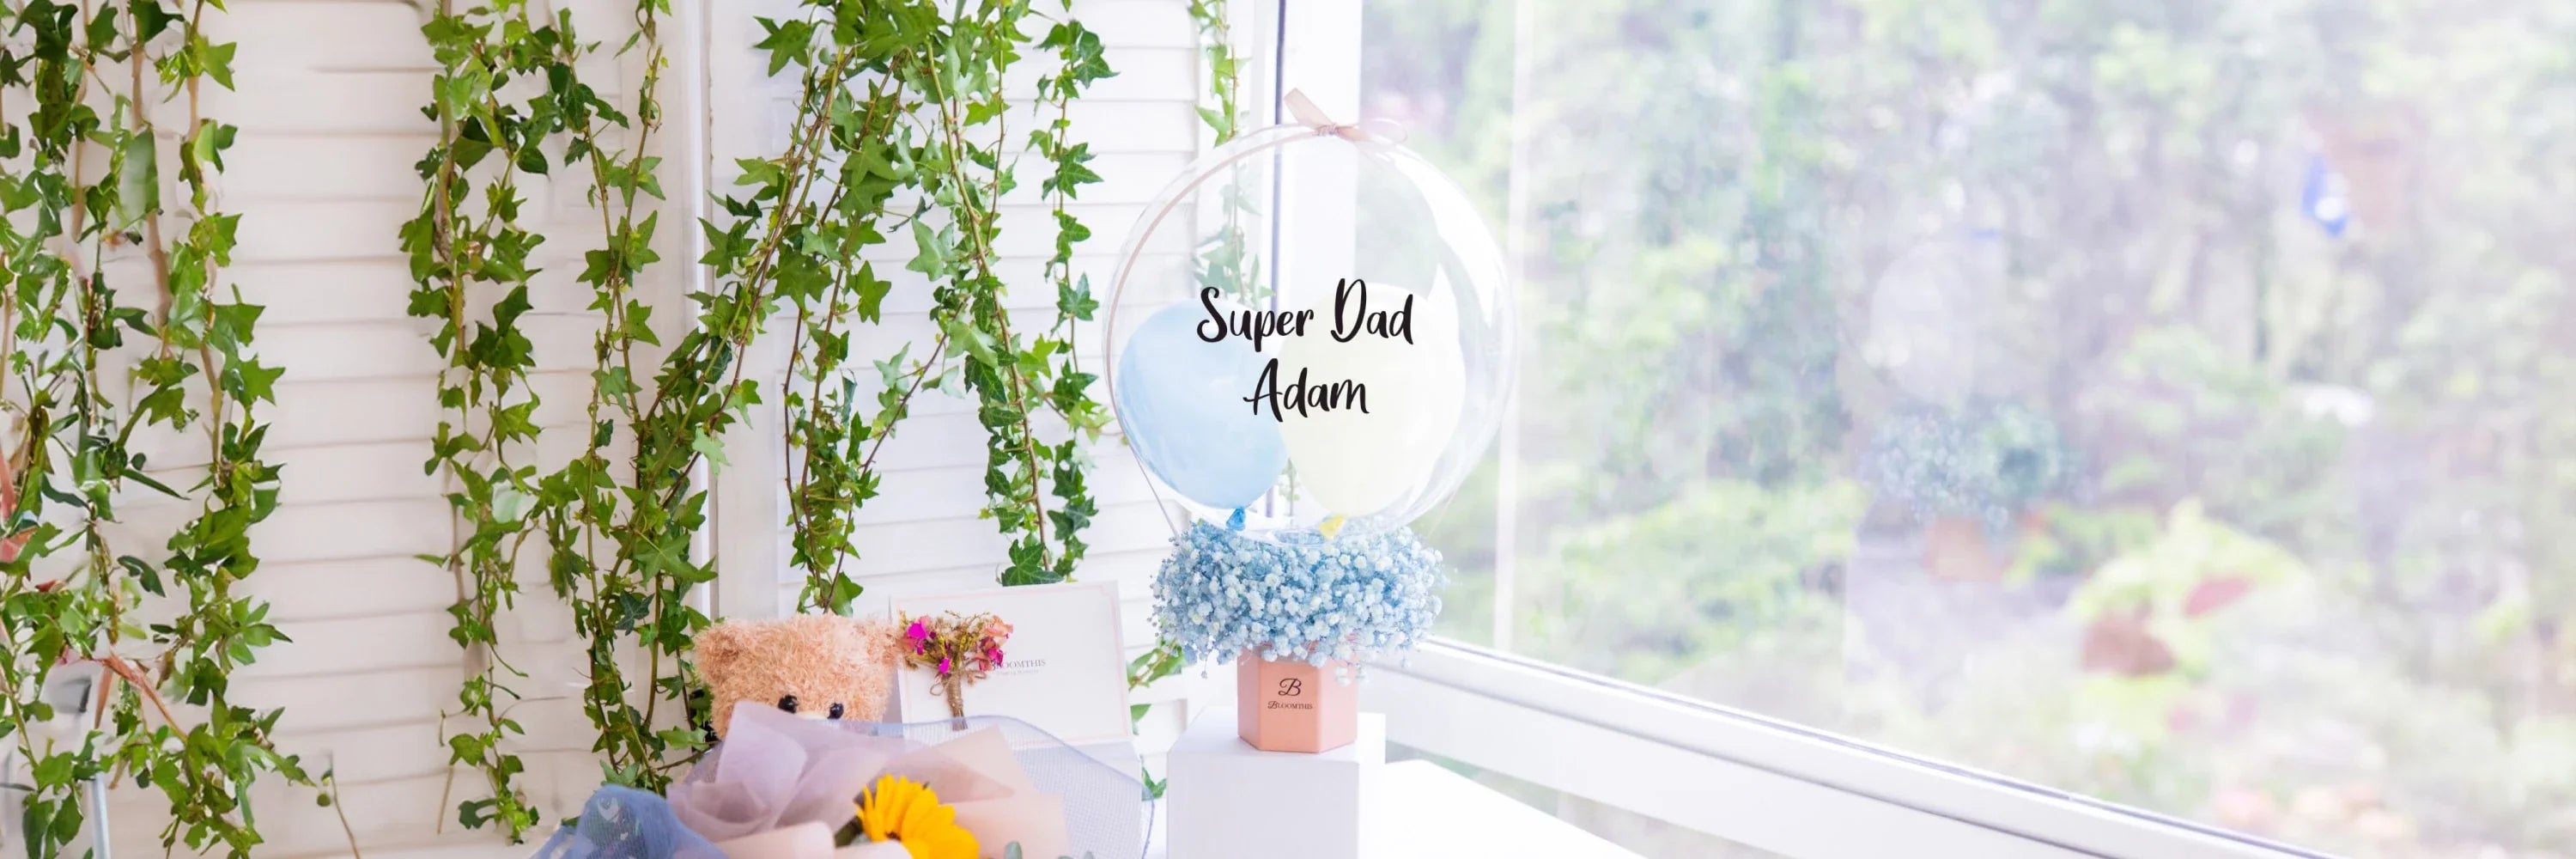 BloomThis Father's Day gifts & flowers